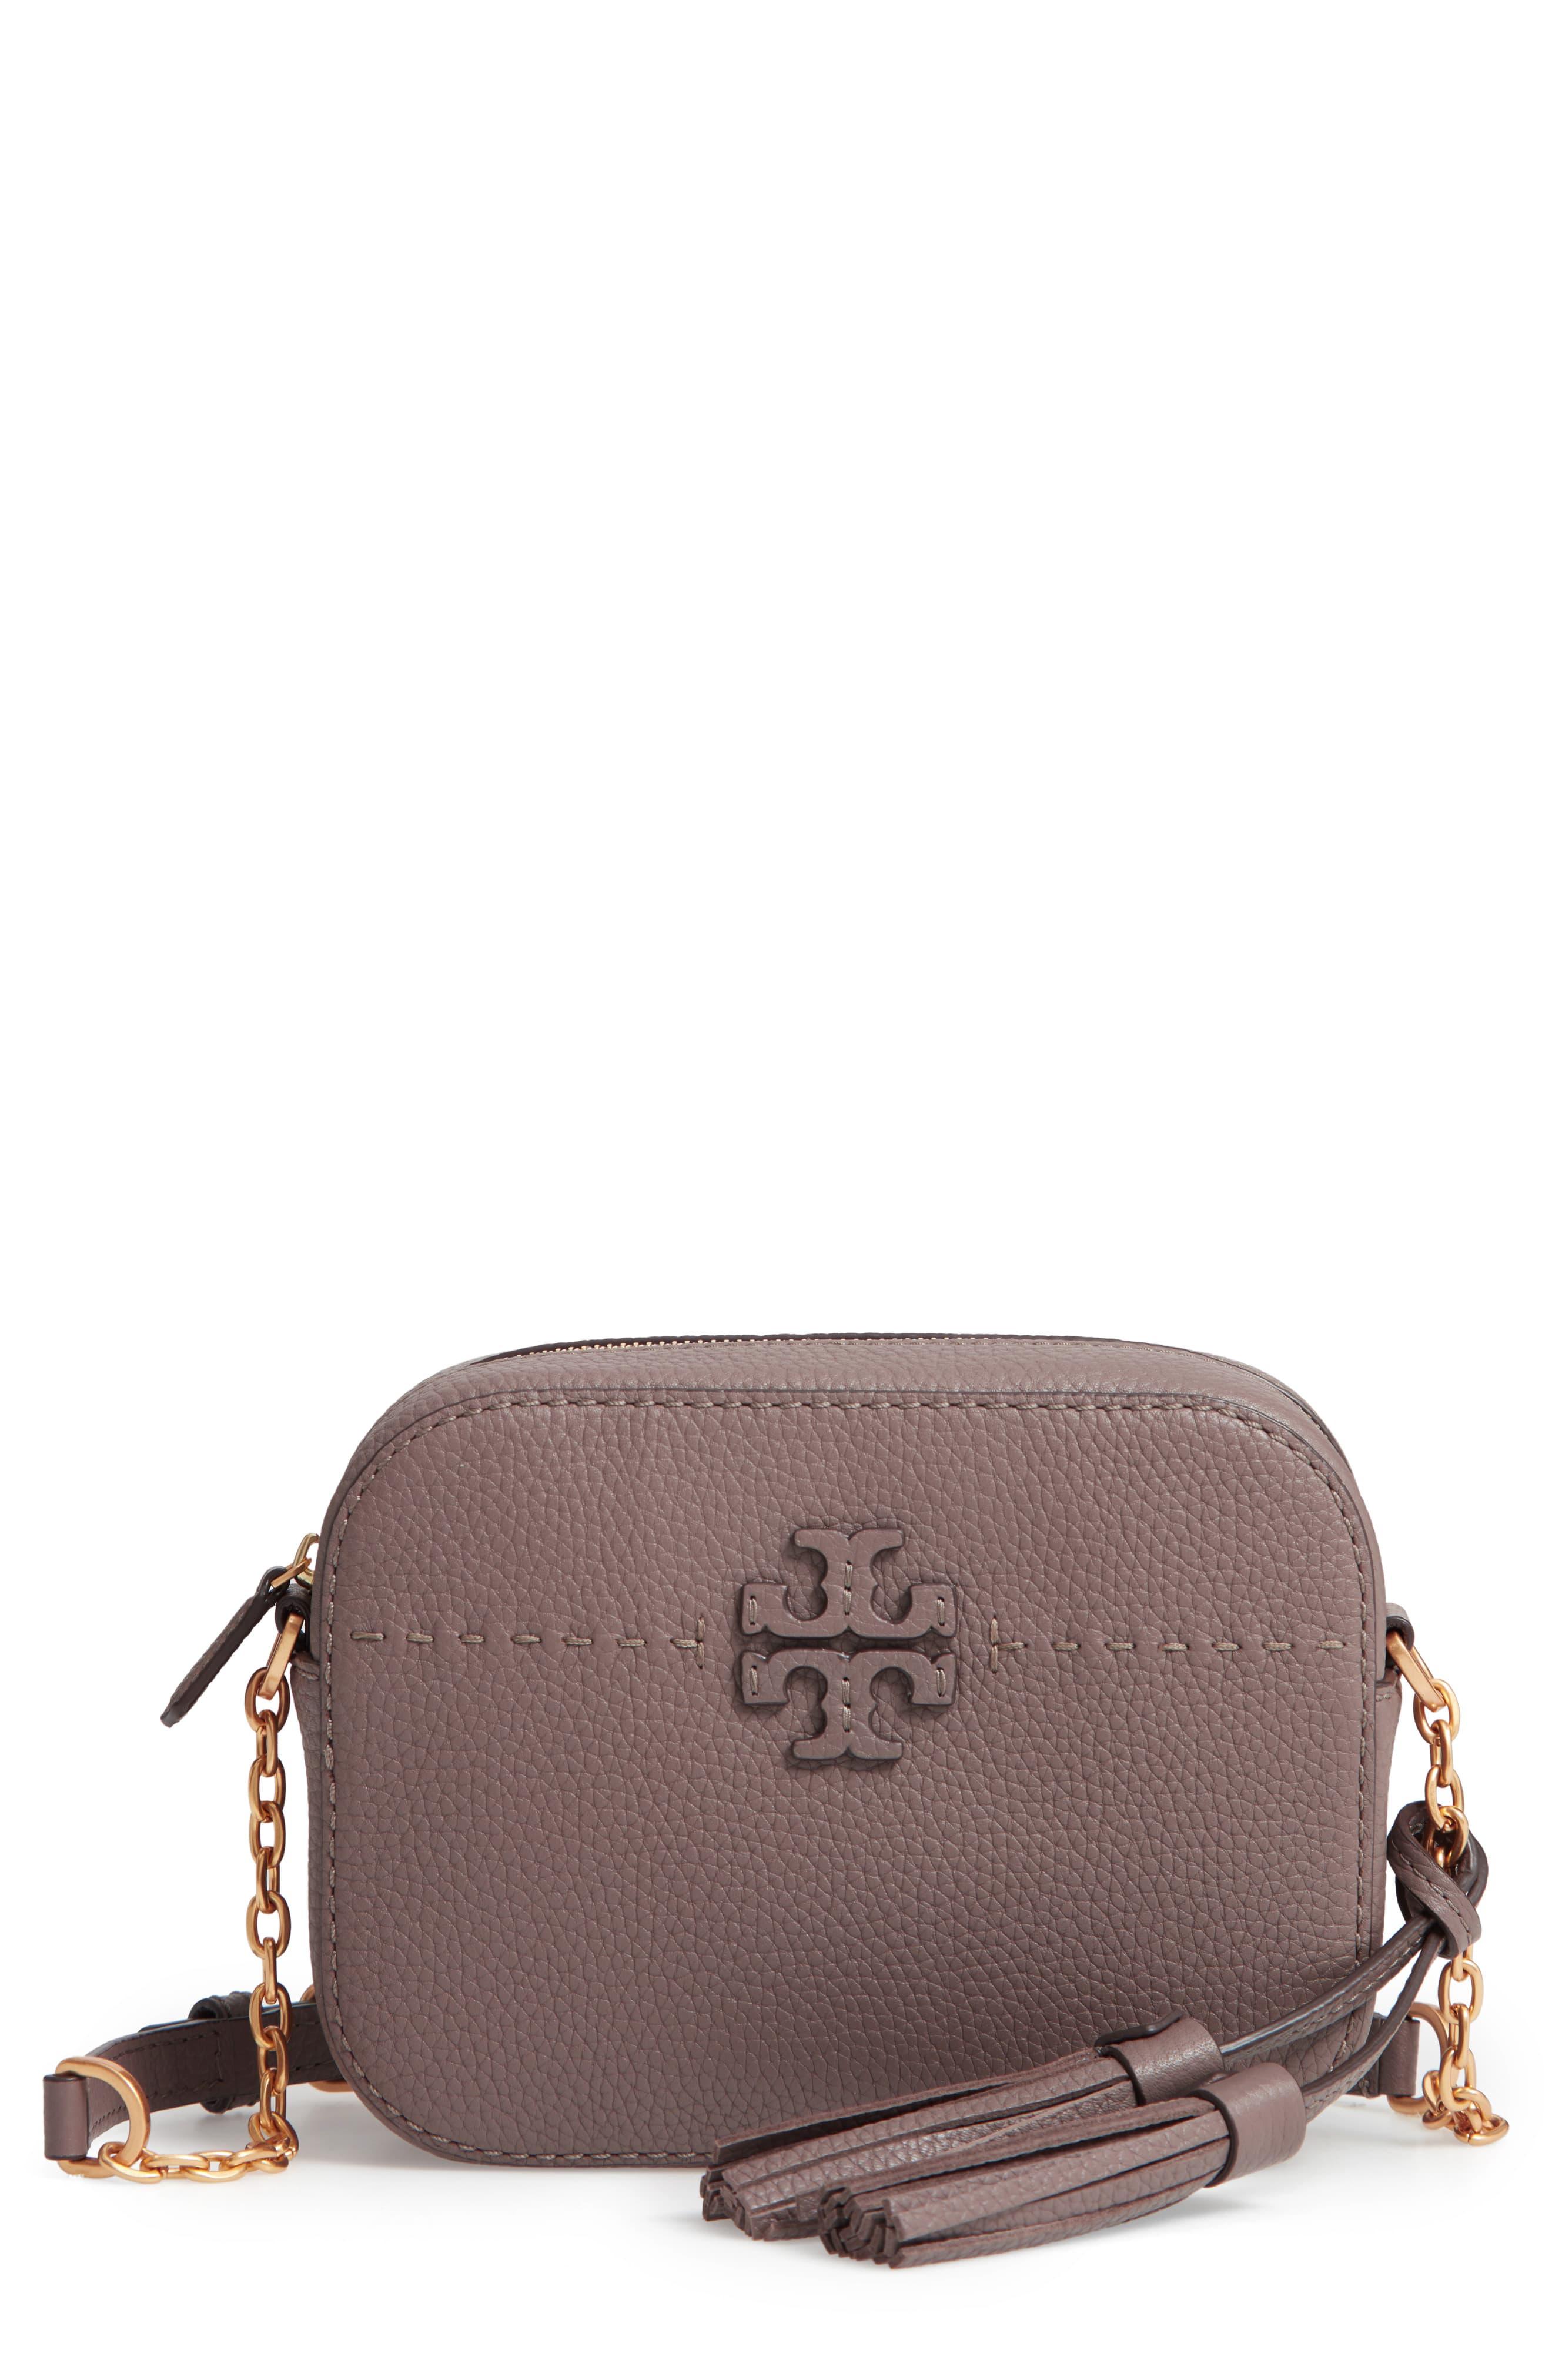 Tory Burch Leather Mcgraw Camera Bag in Pale Violet (Purple) - Save 50% ...